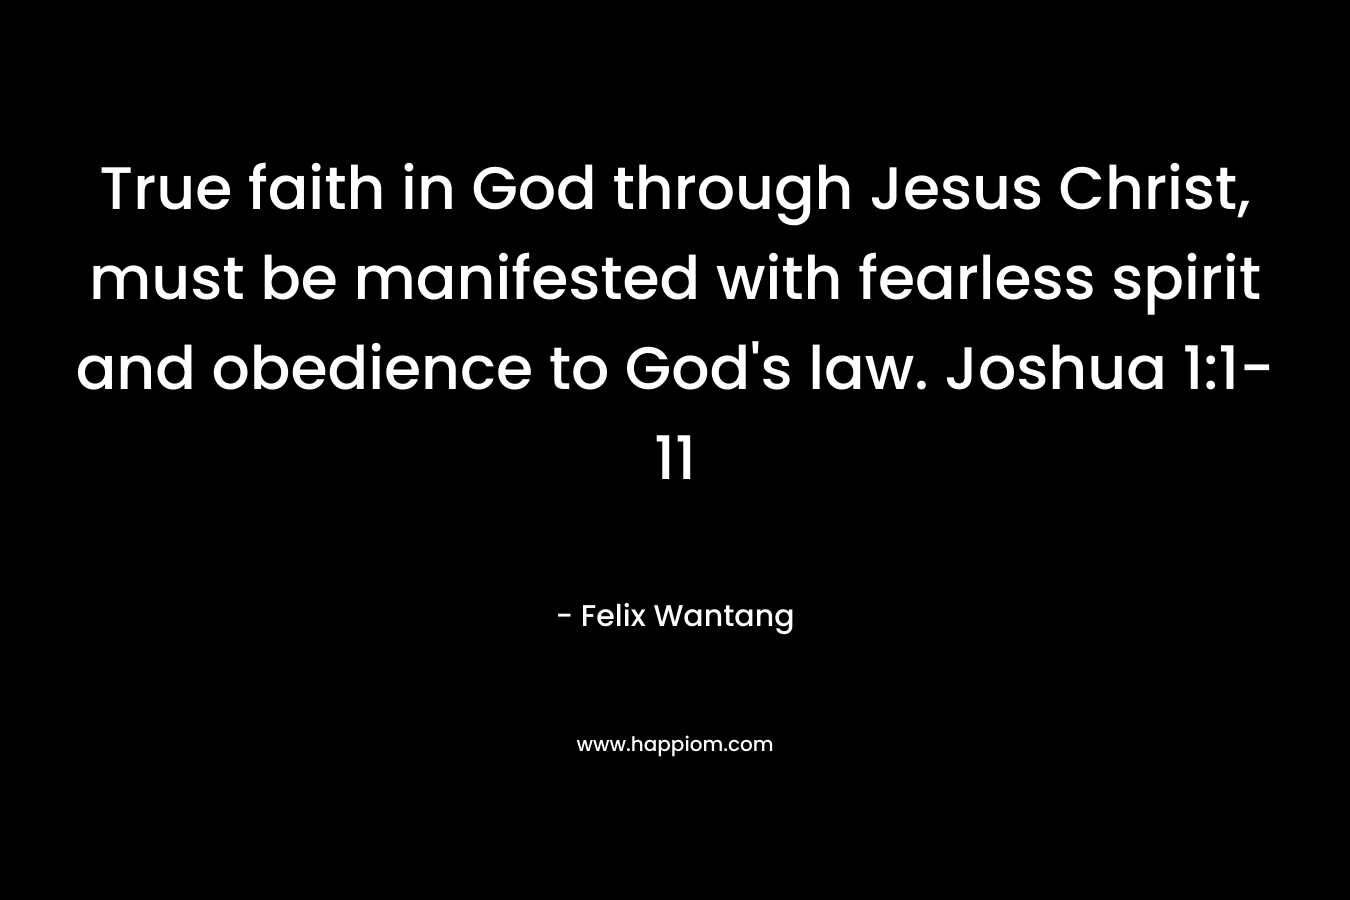 True faith in God through Jesus Christ, must be manifested with fearless spirit and obedience to God’s law. Joshua 1:1-11 – Felix Wantang